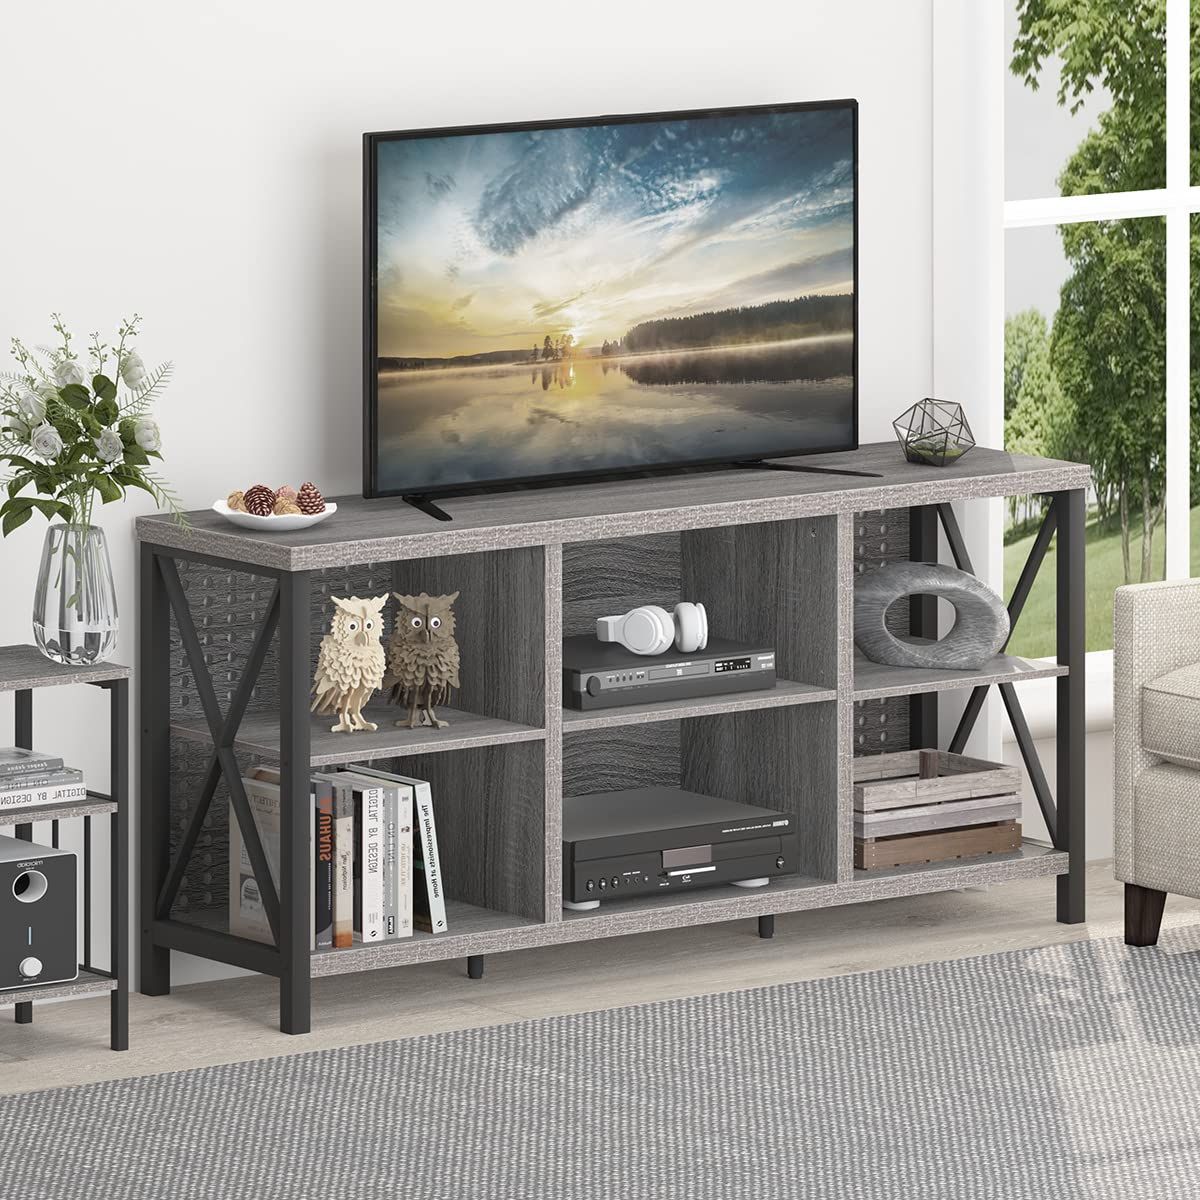 Widely Used Rustic Natural Tv Stands Pertaining To Amazon: Lvb Rustic Tv Stand For 55 Inch Tv, Industrial Home  Entertainment Center With Cabinet Storage Shelf, Modern Wood And Metal  Television Media Console Table For Bedroom Living Room, Light Gray Oak, (View 4 of 10)